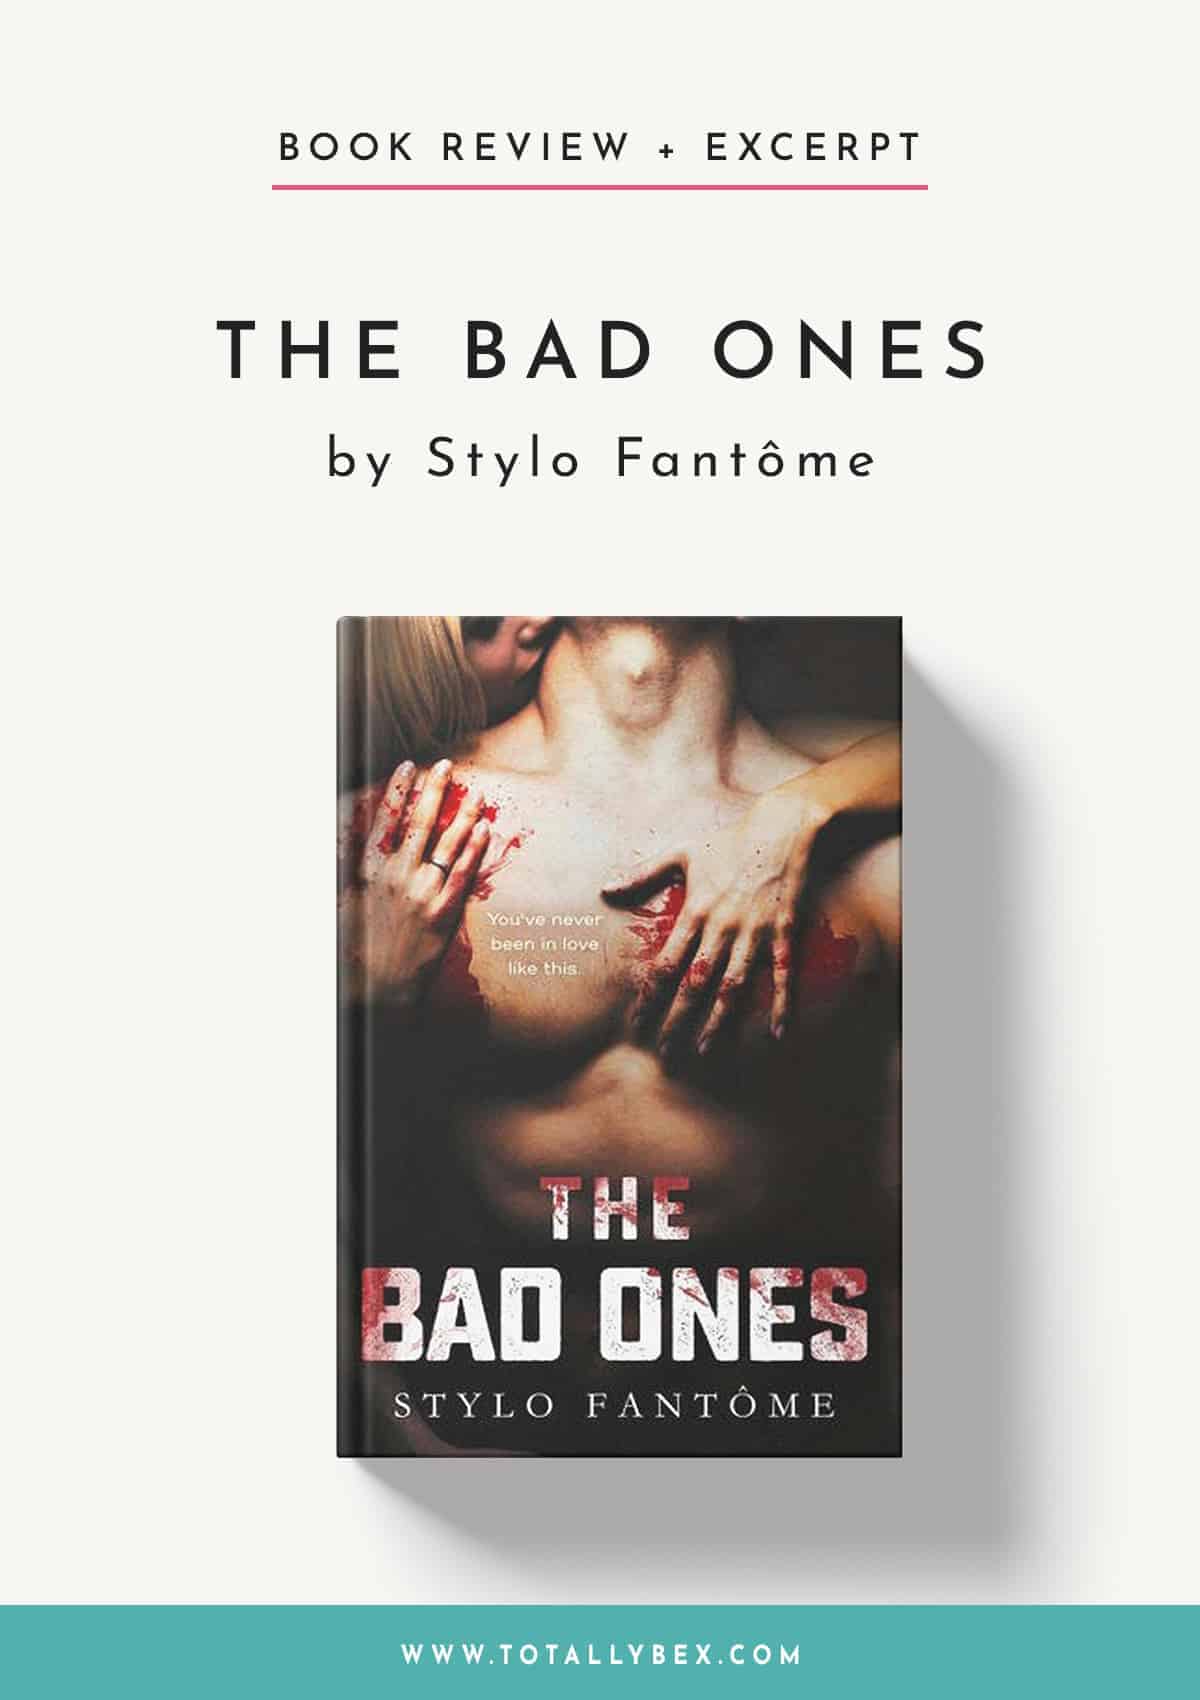 The Bad Ones by Stylo Fantome-Book Review+Excerpt